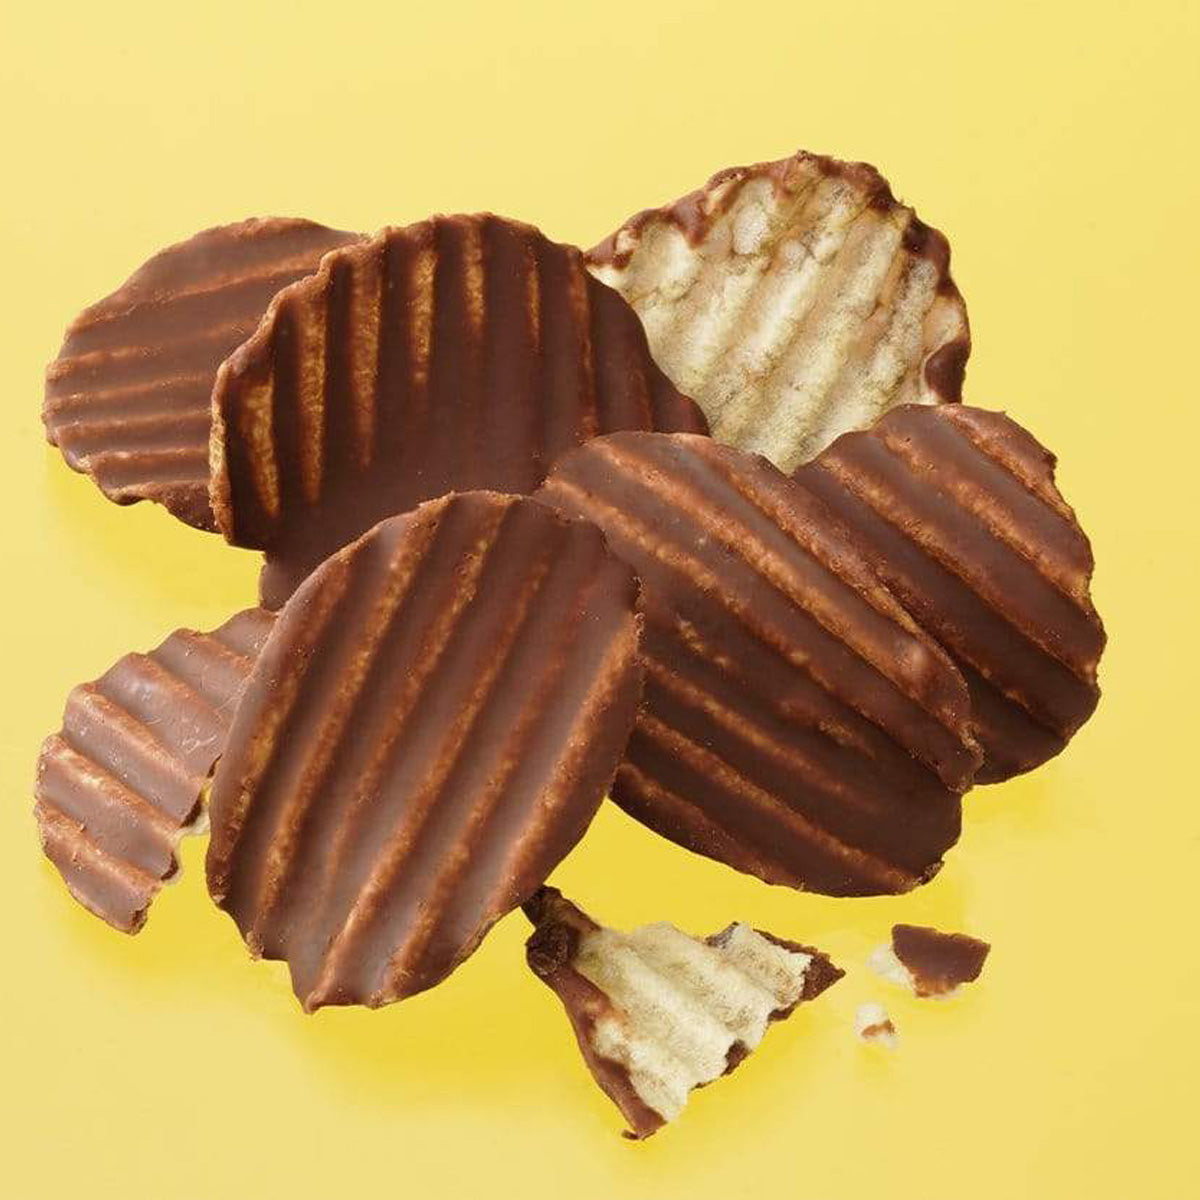 ROYCE' Chocolate - Potatochip Chocolate "Original" - Image shows brown chocolate-covered potato chips with a ridged texture. Background is in yellow color.